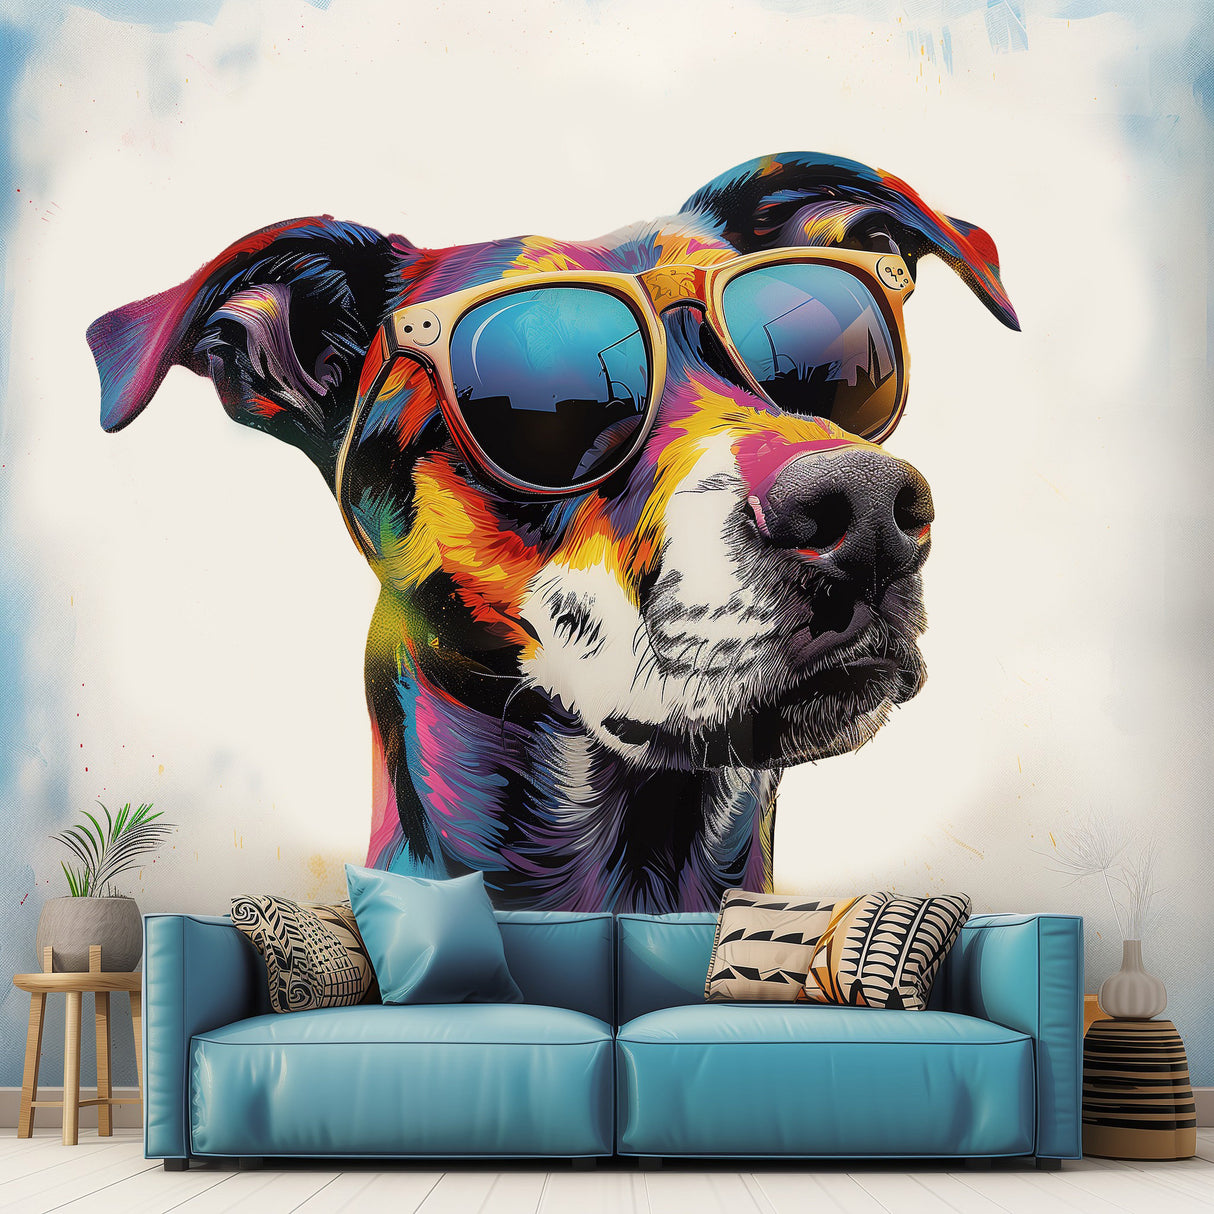 Border Collie in Glasses Wall Sticker - Playful Watercolor Dog Decor Decal